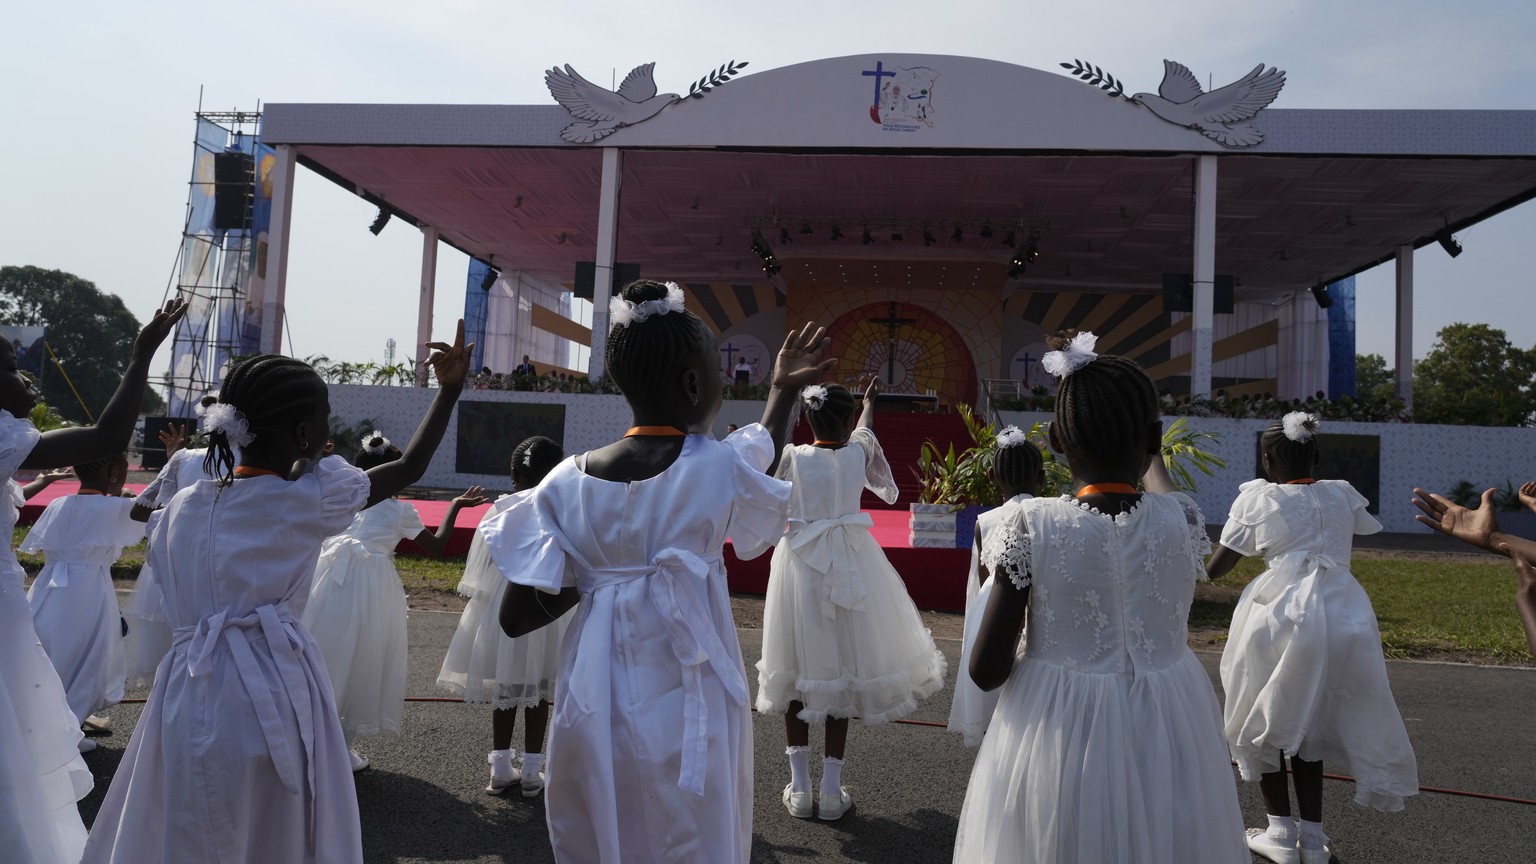 Children chant and dance as they with for PopeFrancis at Ndolo airport where he will preside over the Holy Mass in Kinshasa, Congo, Wednesday Feb. 1, 2023. Francis is in Congo and South Sudan for a si ...